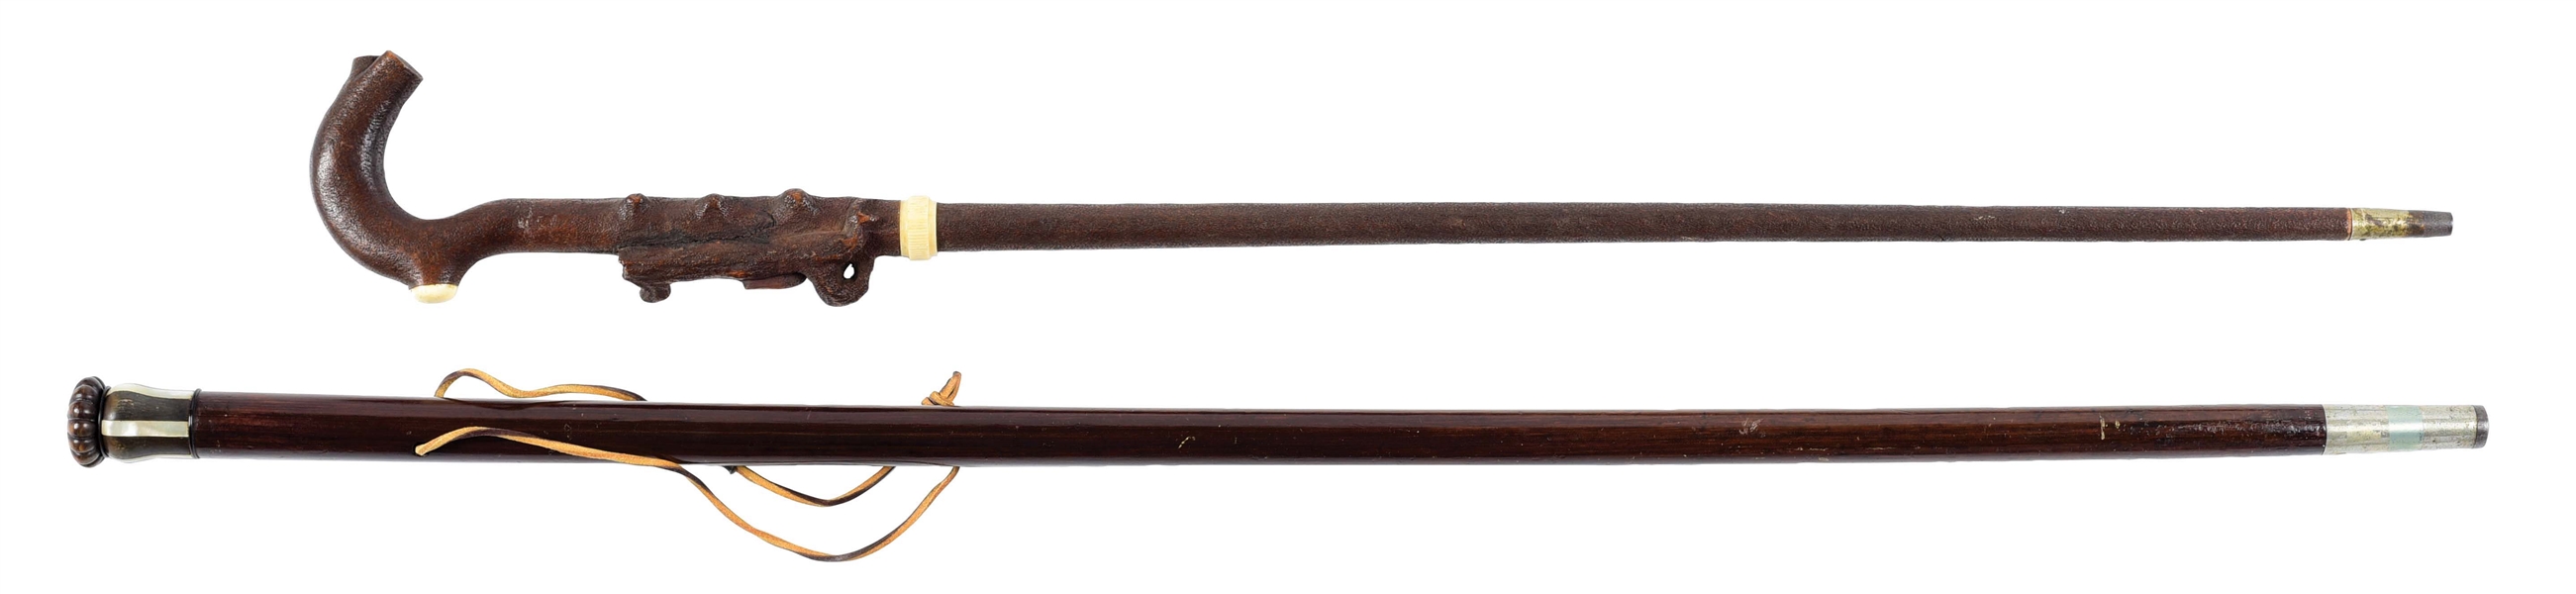 LOT OF 2: EXOTIC HARDWOOD MOTHER OF PEARL CANE & HAND CARVED STUDENTS CANE.